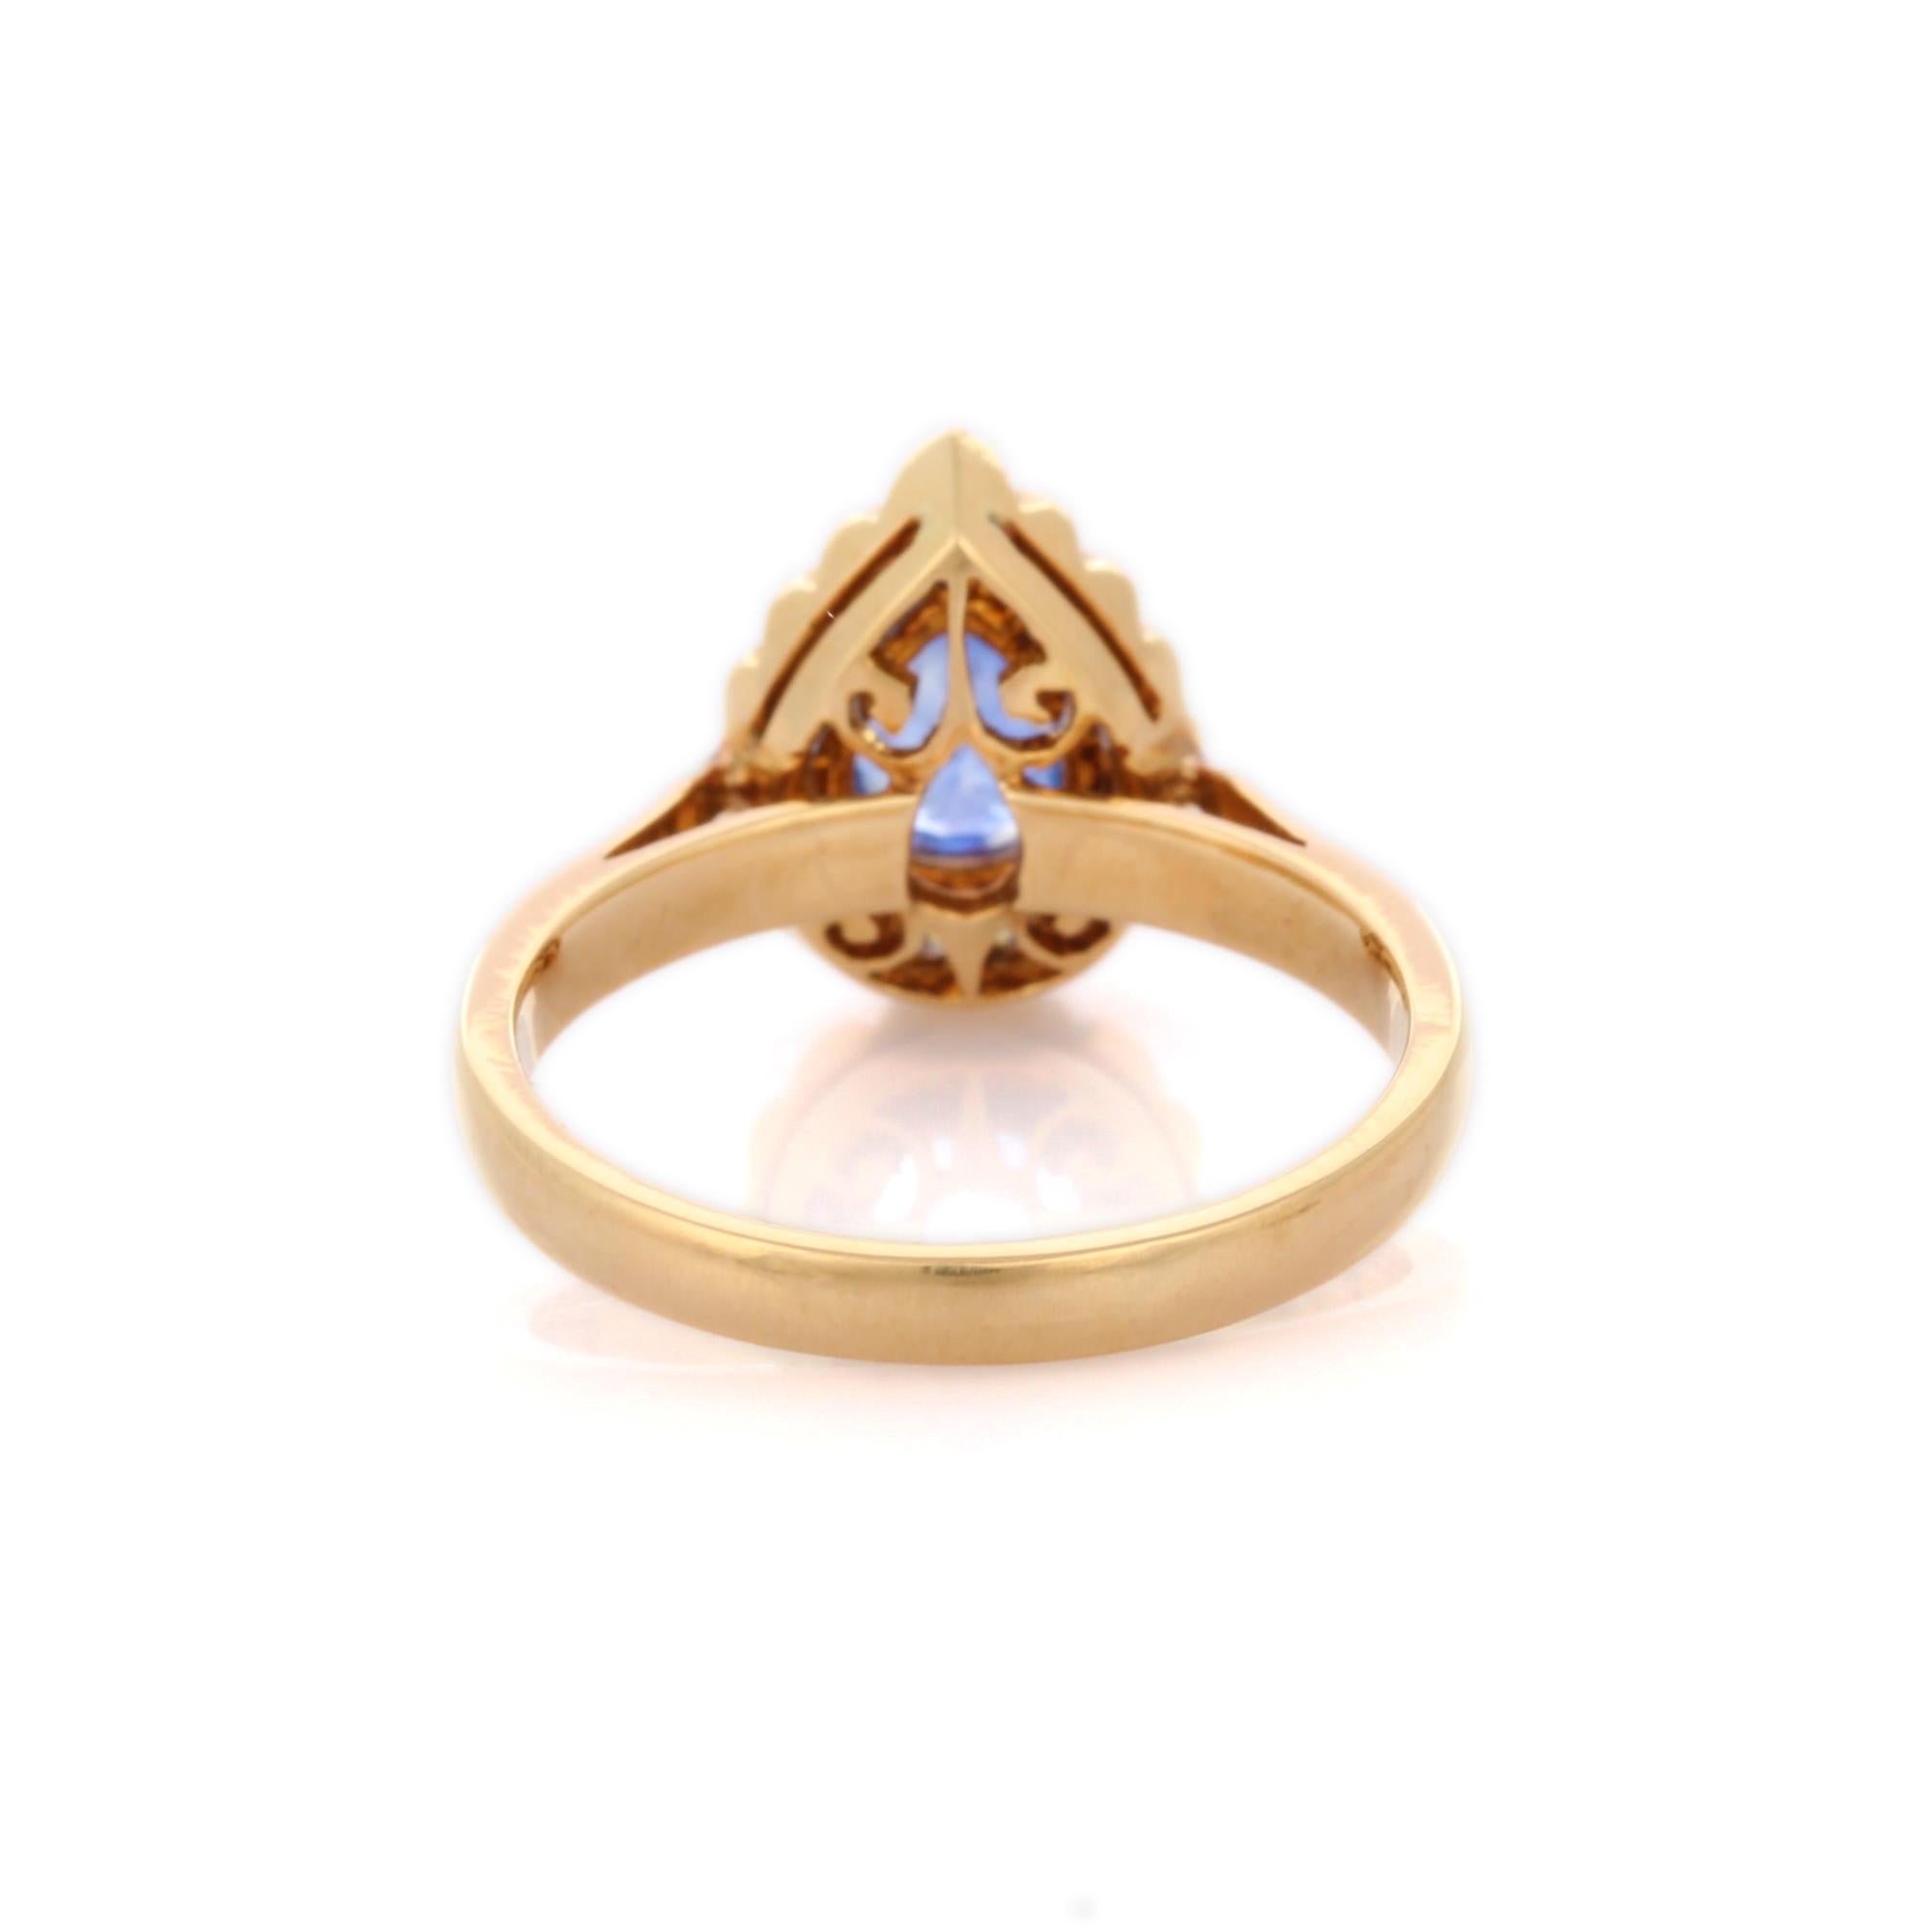 For Sale:  Pear Cut Blue Sapphire Ringed with Diamonds Engagement Ring in 18K Yellow Gold 4